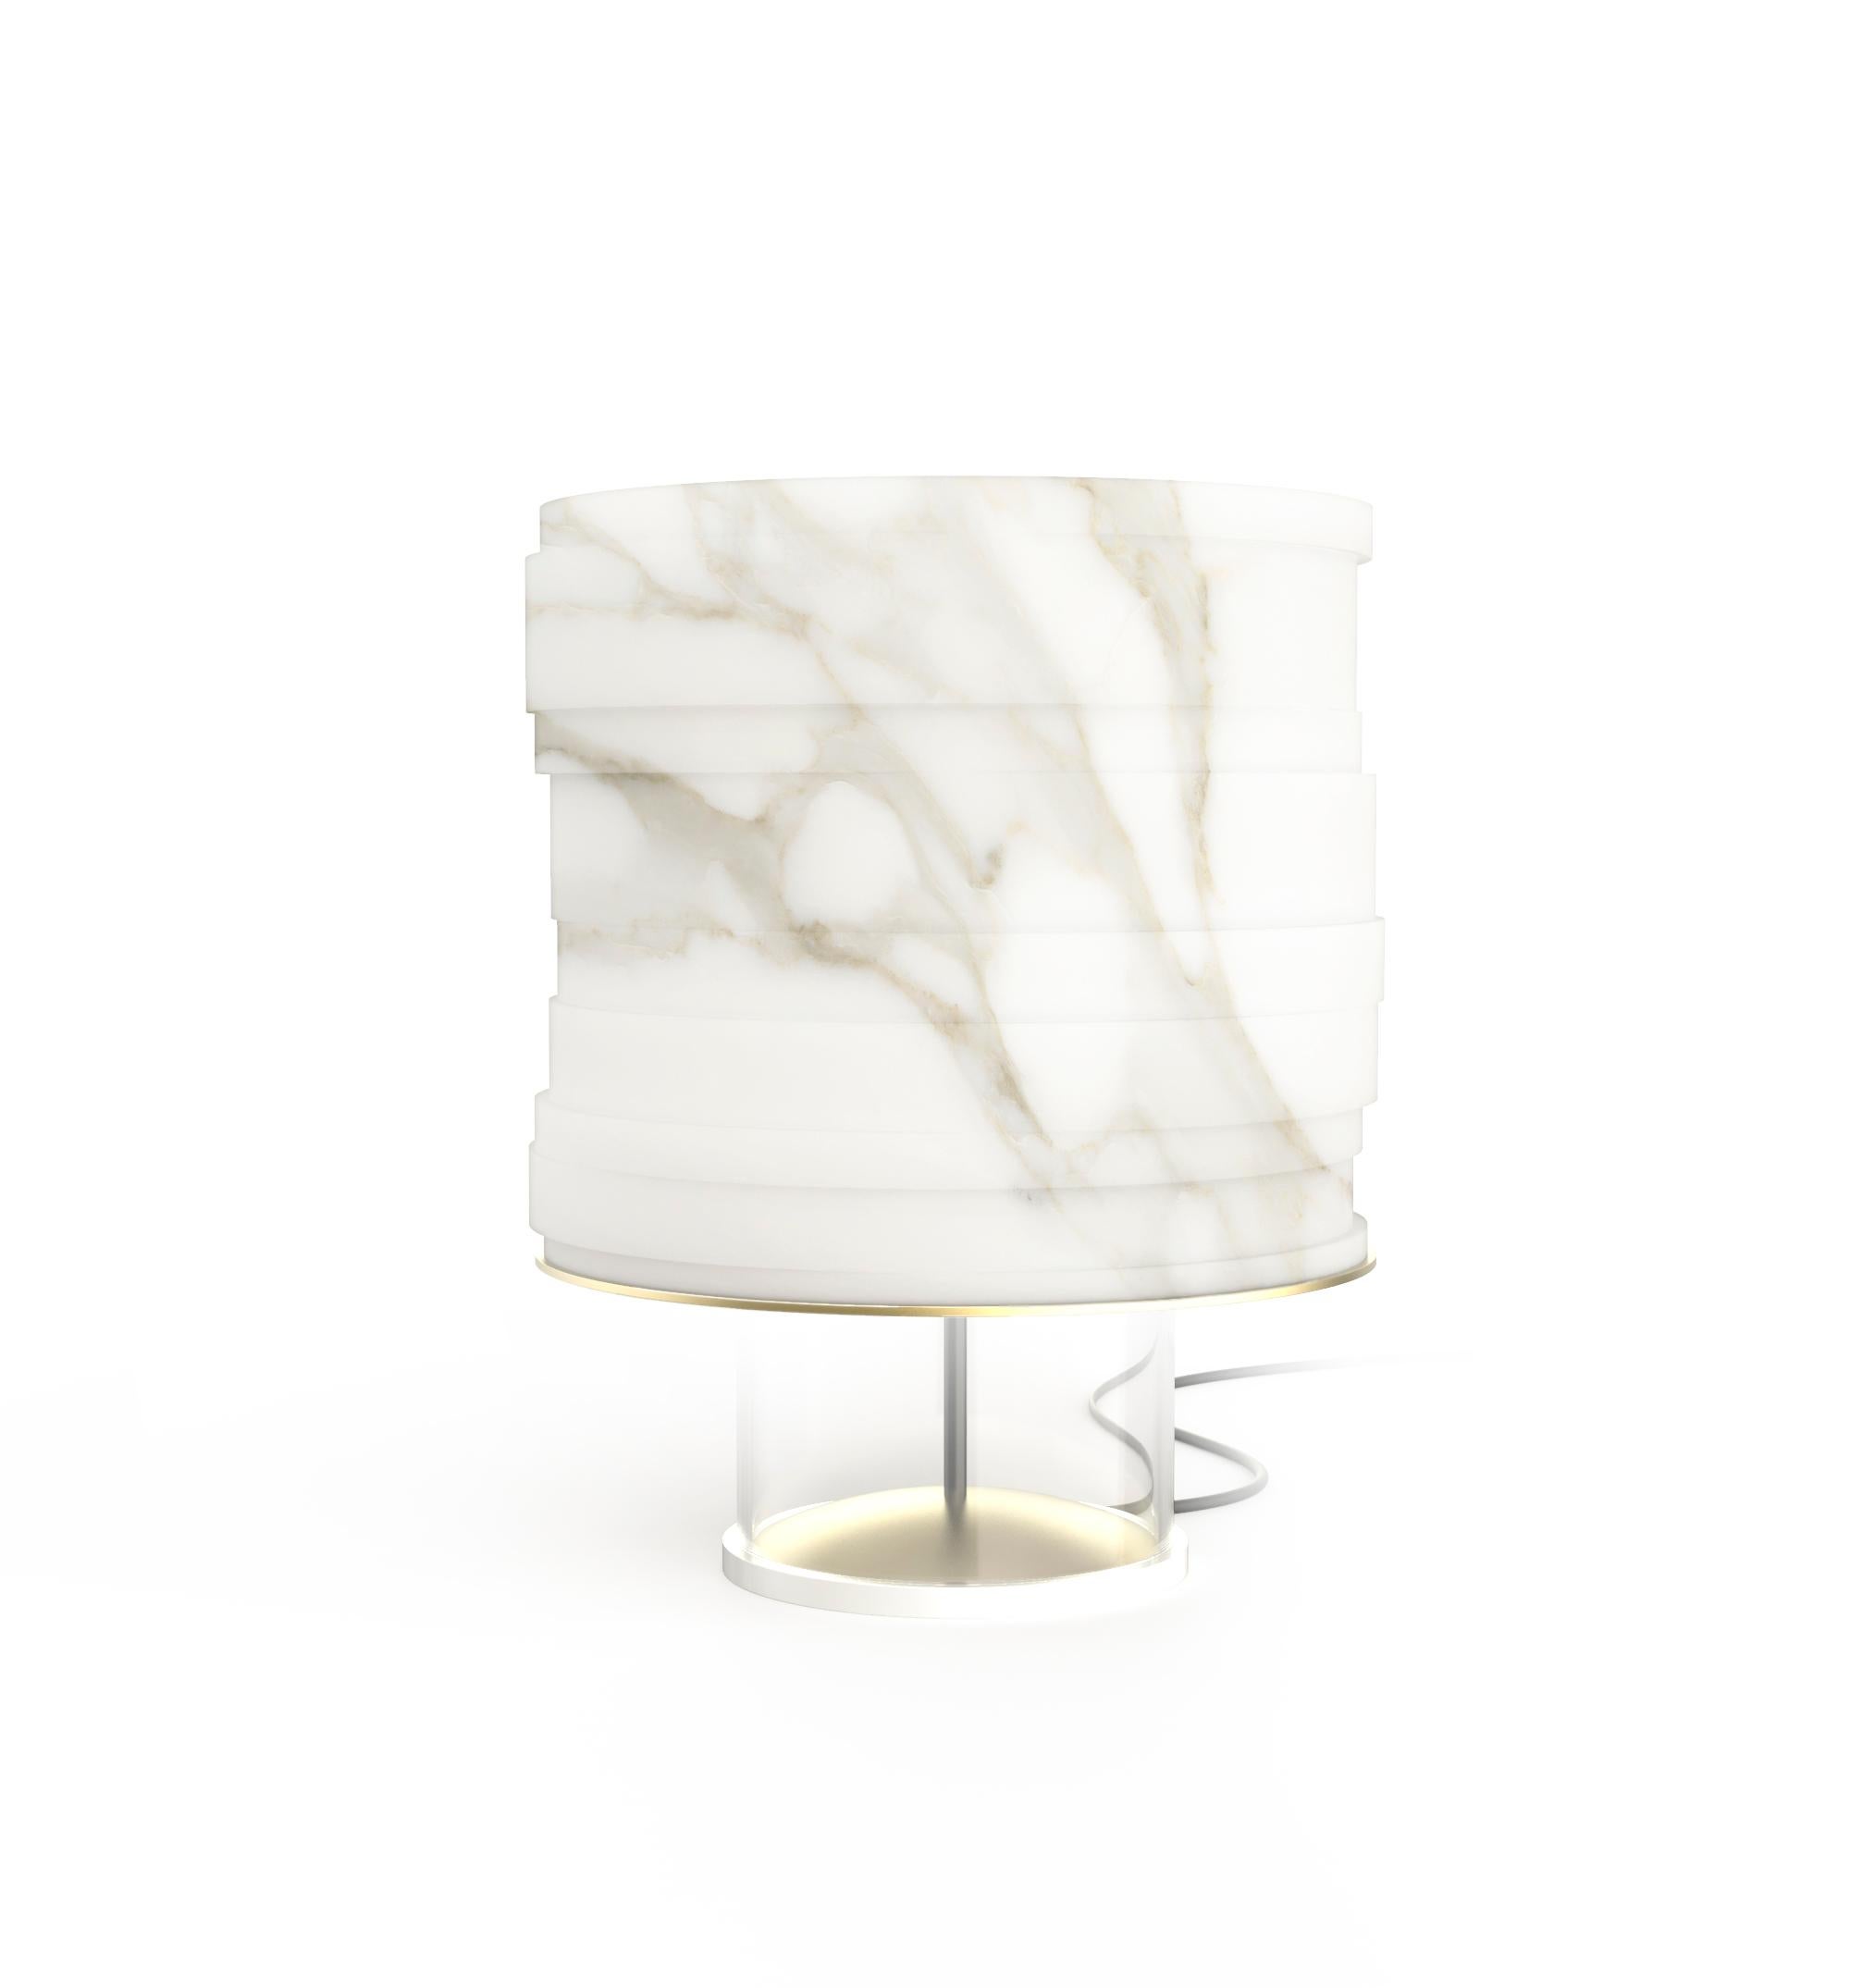 Capsule Module3 table lamp by Marmi Serafini
Materials: Calcatta Oro marble.
Dimensions: D 28 x H 36 cm
Available in other marbles.

This elegant table lamp is available in three different versions, distinguish by top marble part.
Once light